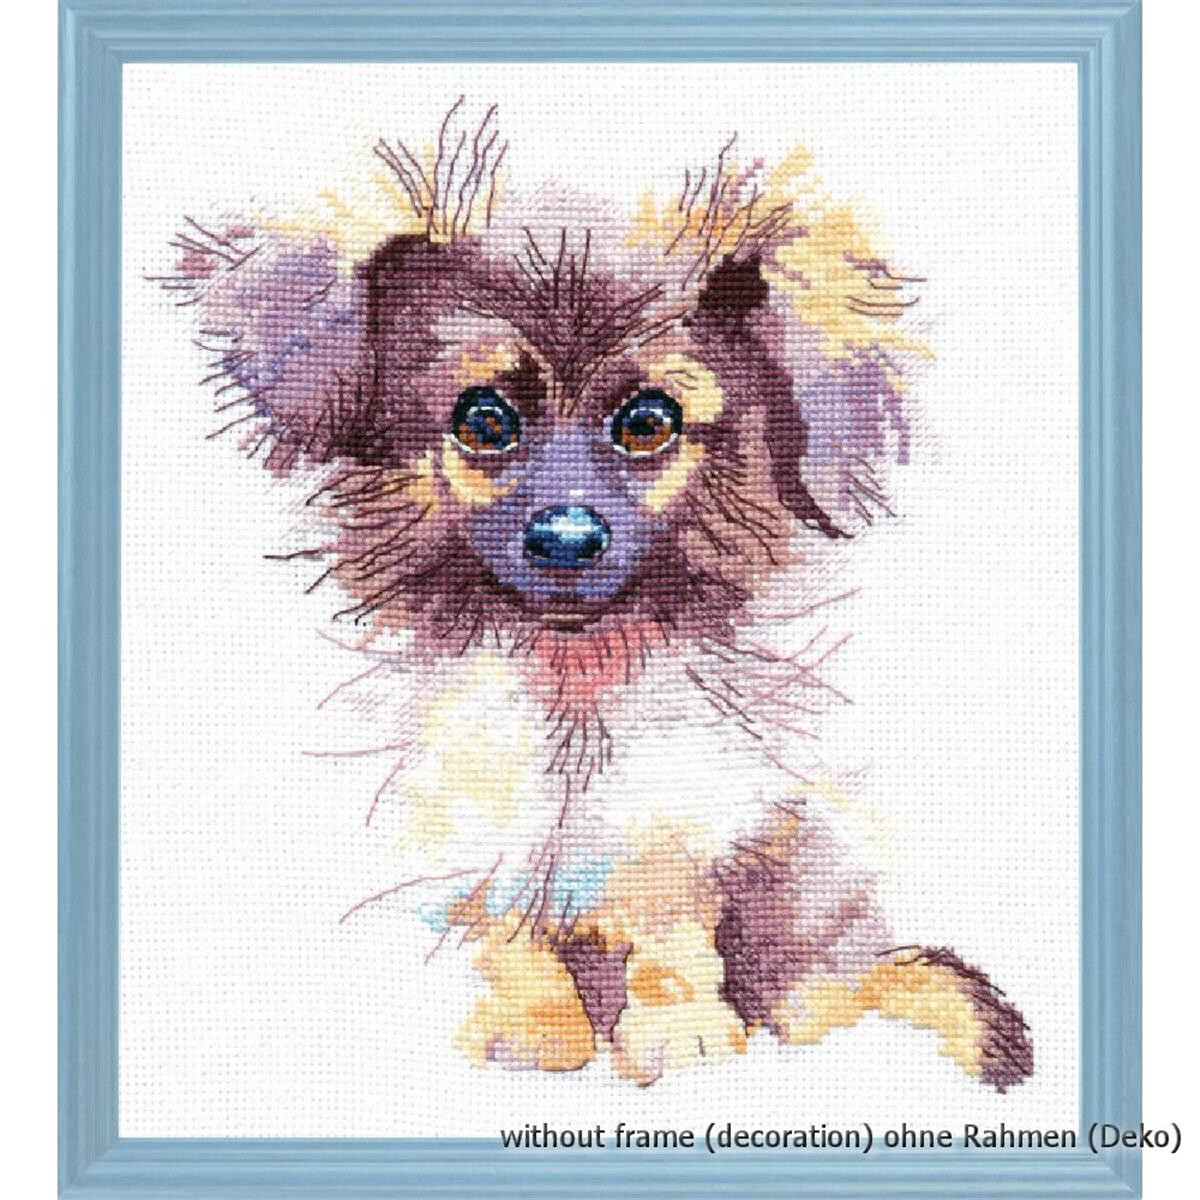 Oven counted cross stitch kit "A fluppy puppy",...